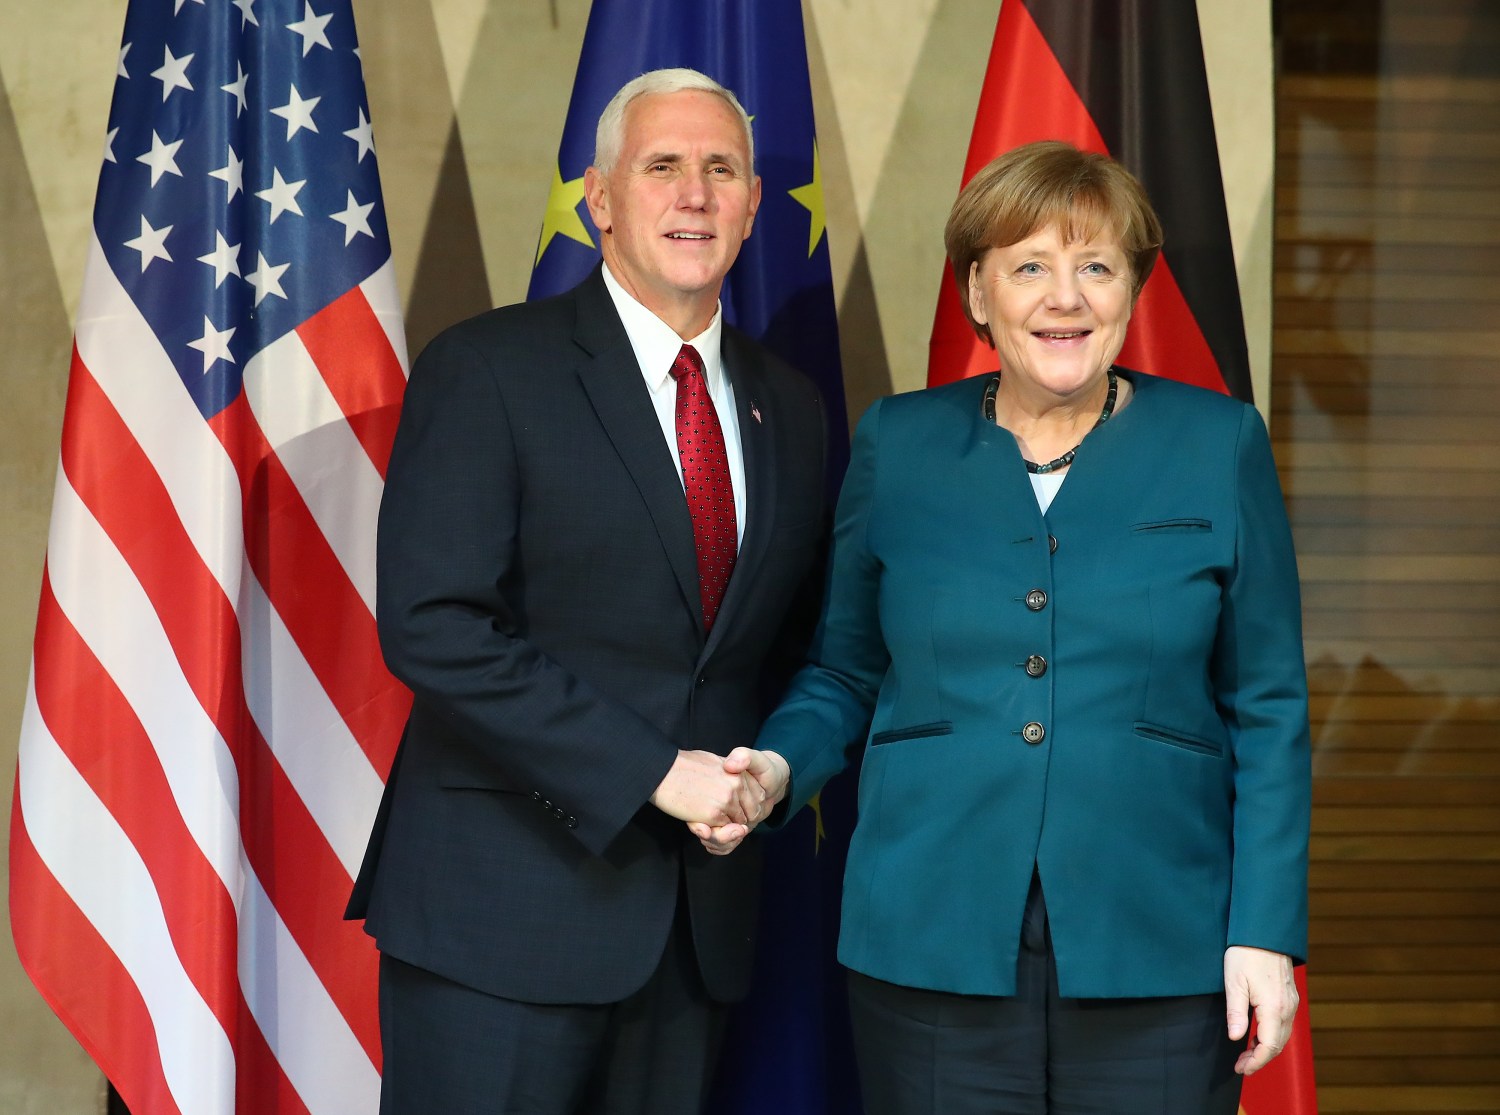 German Chancellor Angela Merkel poses for a picture with U.S. Vice President Mike Pence before their meeting at the 53rd Munich Security Conference in Munich, Germany, February 18, 2017. REUTERS/Michael Dalder - RTSZ8P4